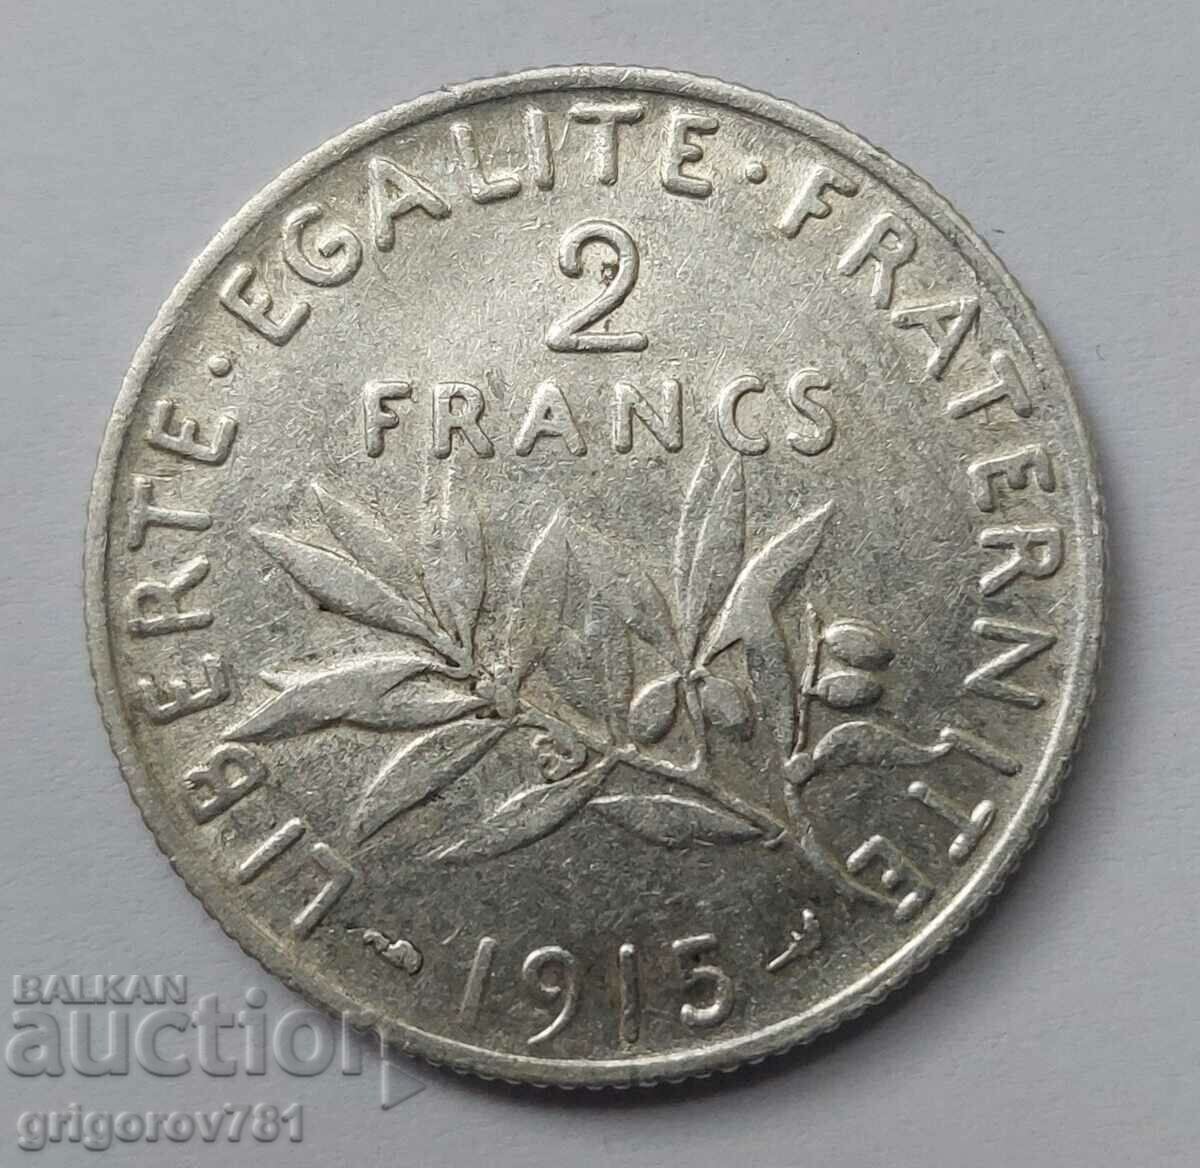 2 Francs Silver France 1915 - Silver Coin #56